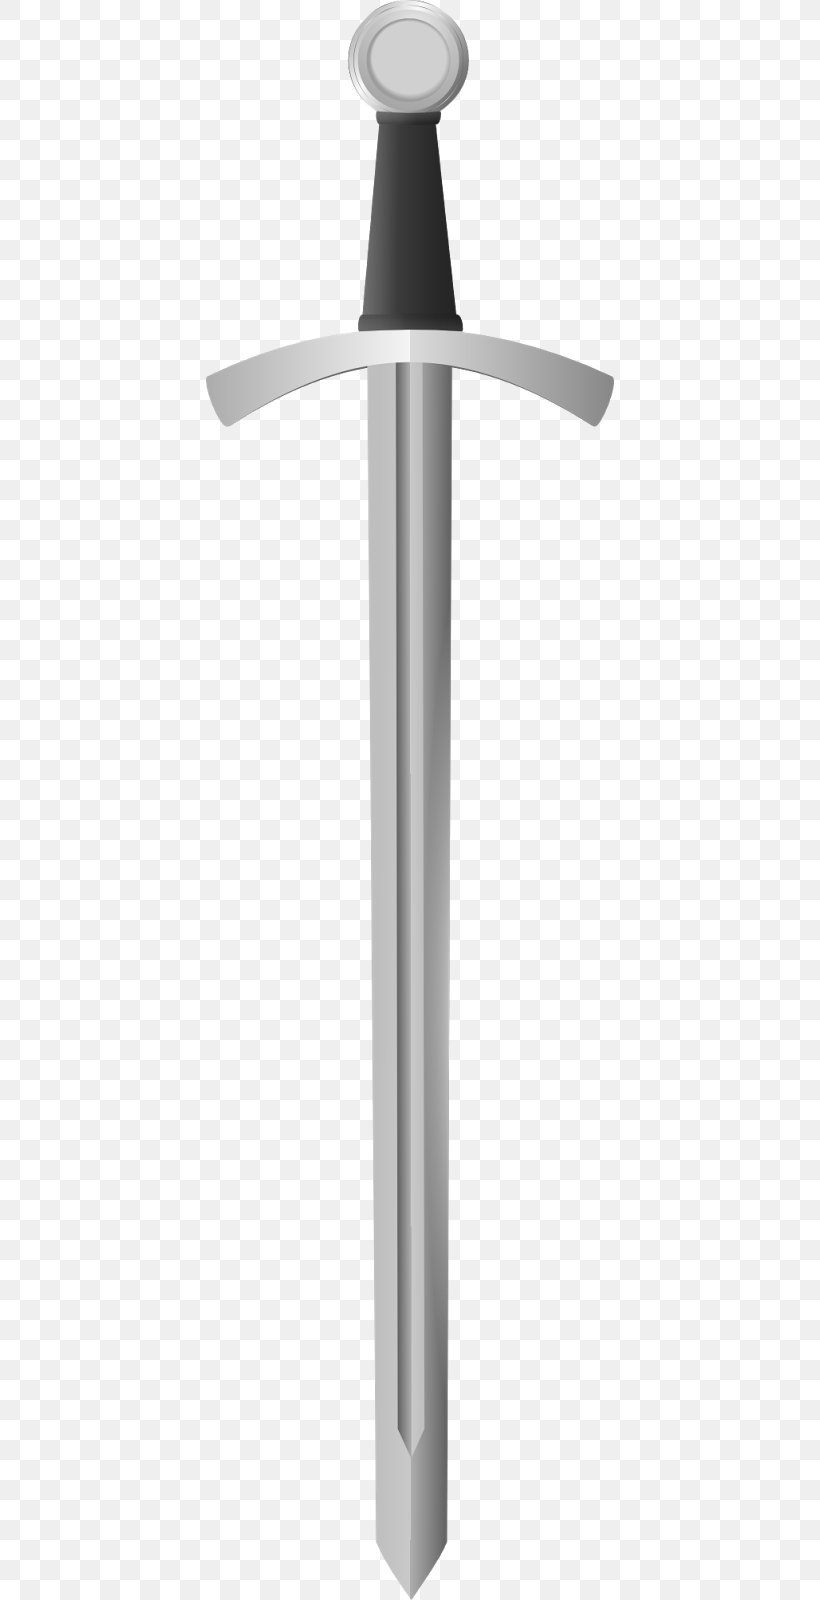 Knightly Sword Viking Sword Clip Art, PNG, 408x1600px, Knightly Sword, Document, Knight, Longsword, Royaltyfree Download Free